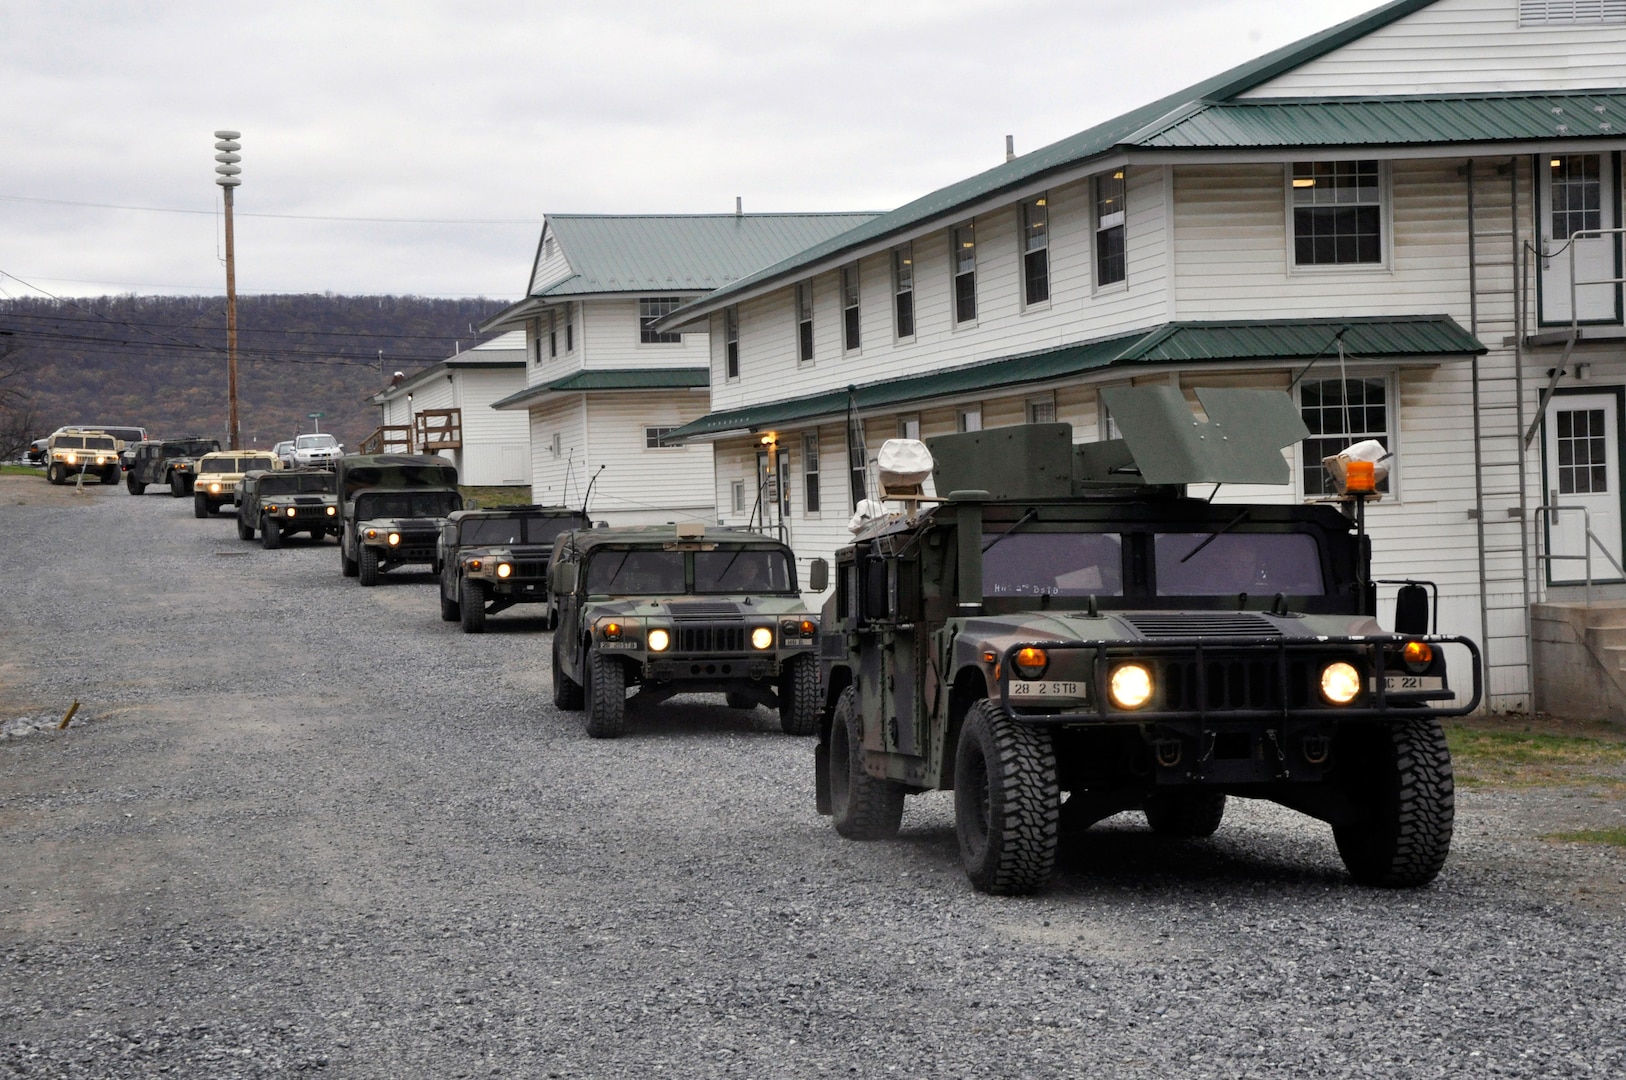 U.S. soldiers with the 28th Military Police Company, Pennsylvania Army National Guard, prepare to depart from Fort Indiantown Gap, Pa., Nov. 4, 2012, to support Hurricane Sandy relief efforts in the New York City area.